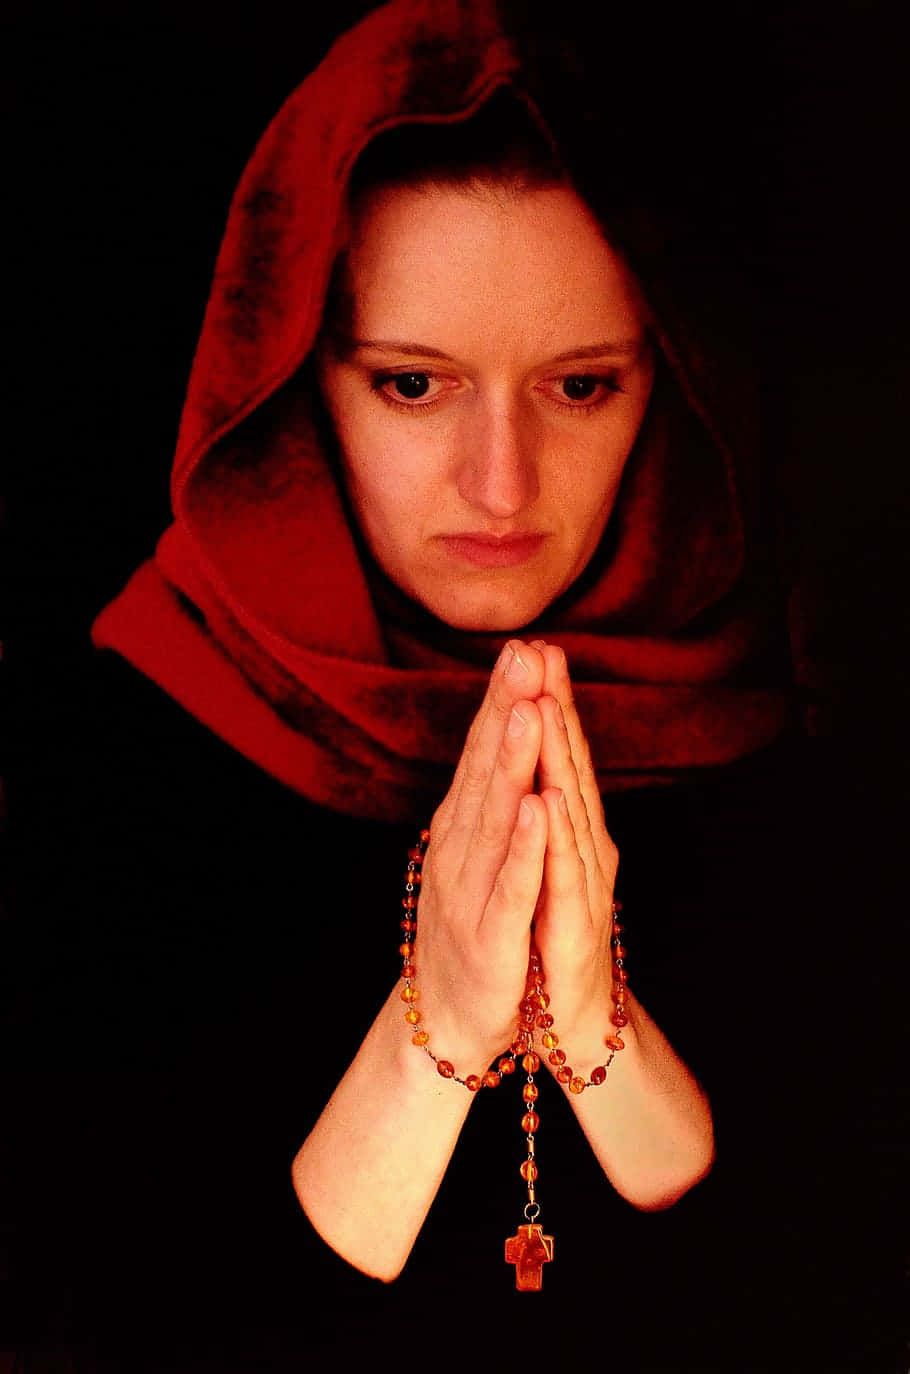 Woman Praying With A Red Scarf Wallpaper